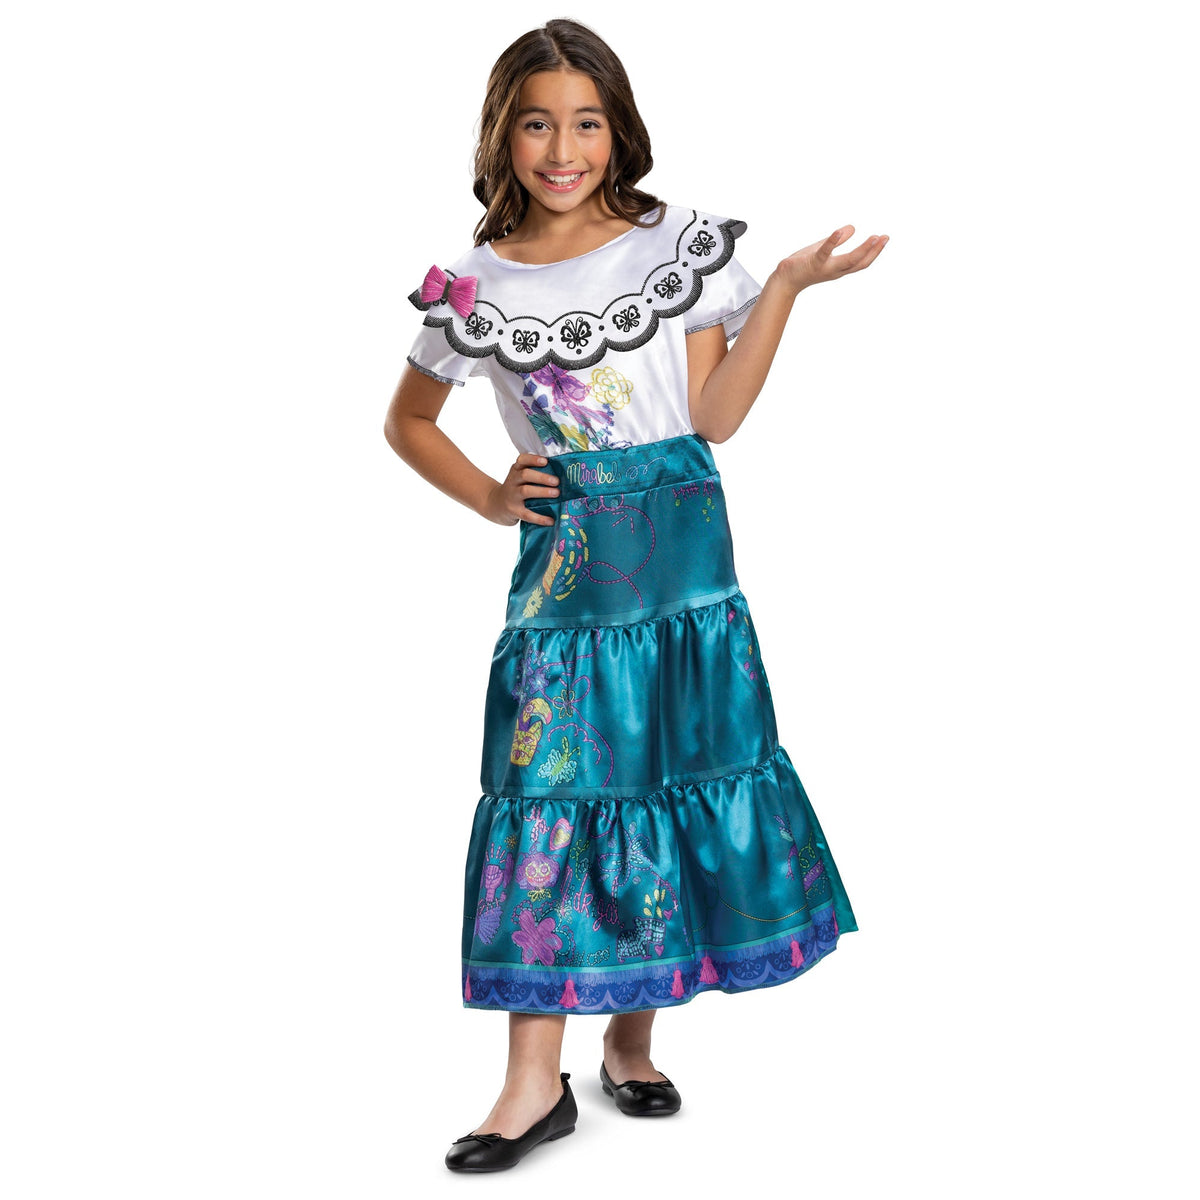 DISGUISE (TOY-SPORT) Costumes Disney Encanto Mirabel Classic Costume for Kids, Blue Floral Dress